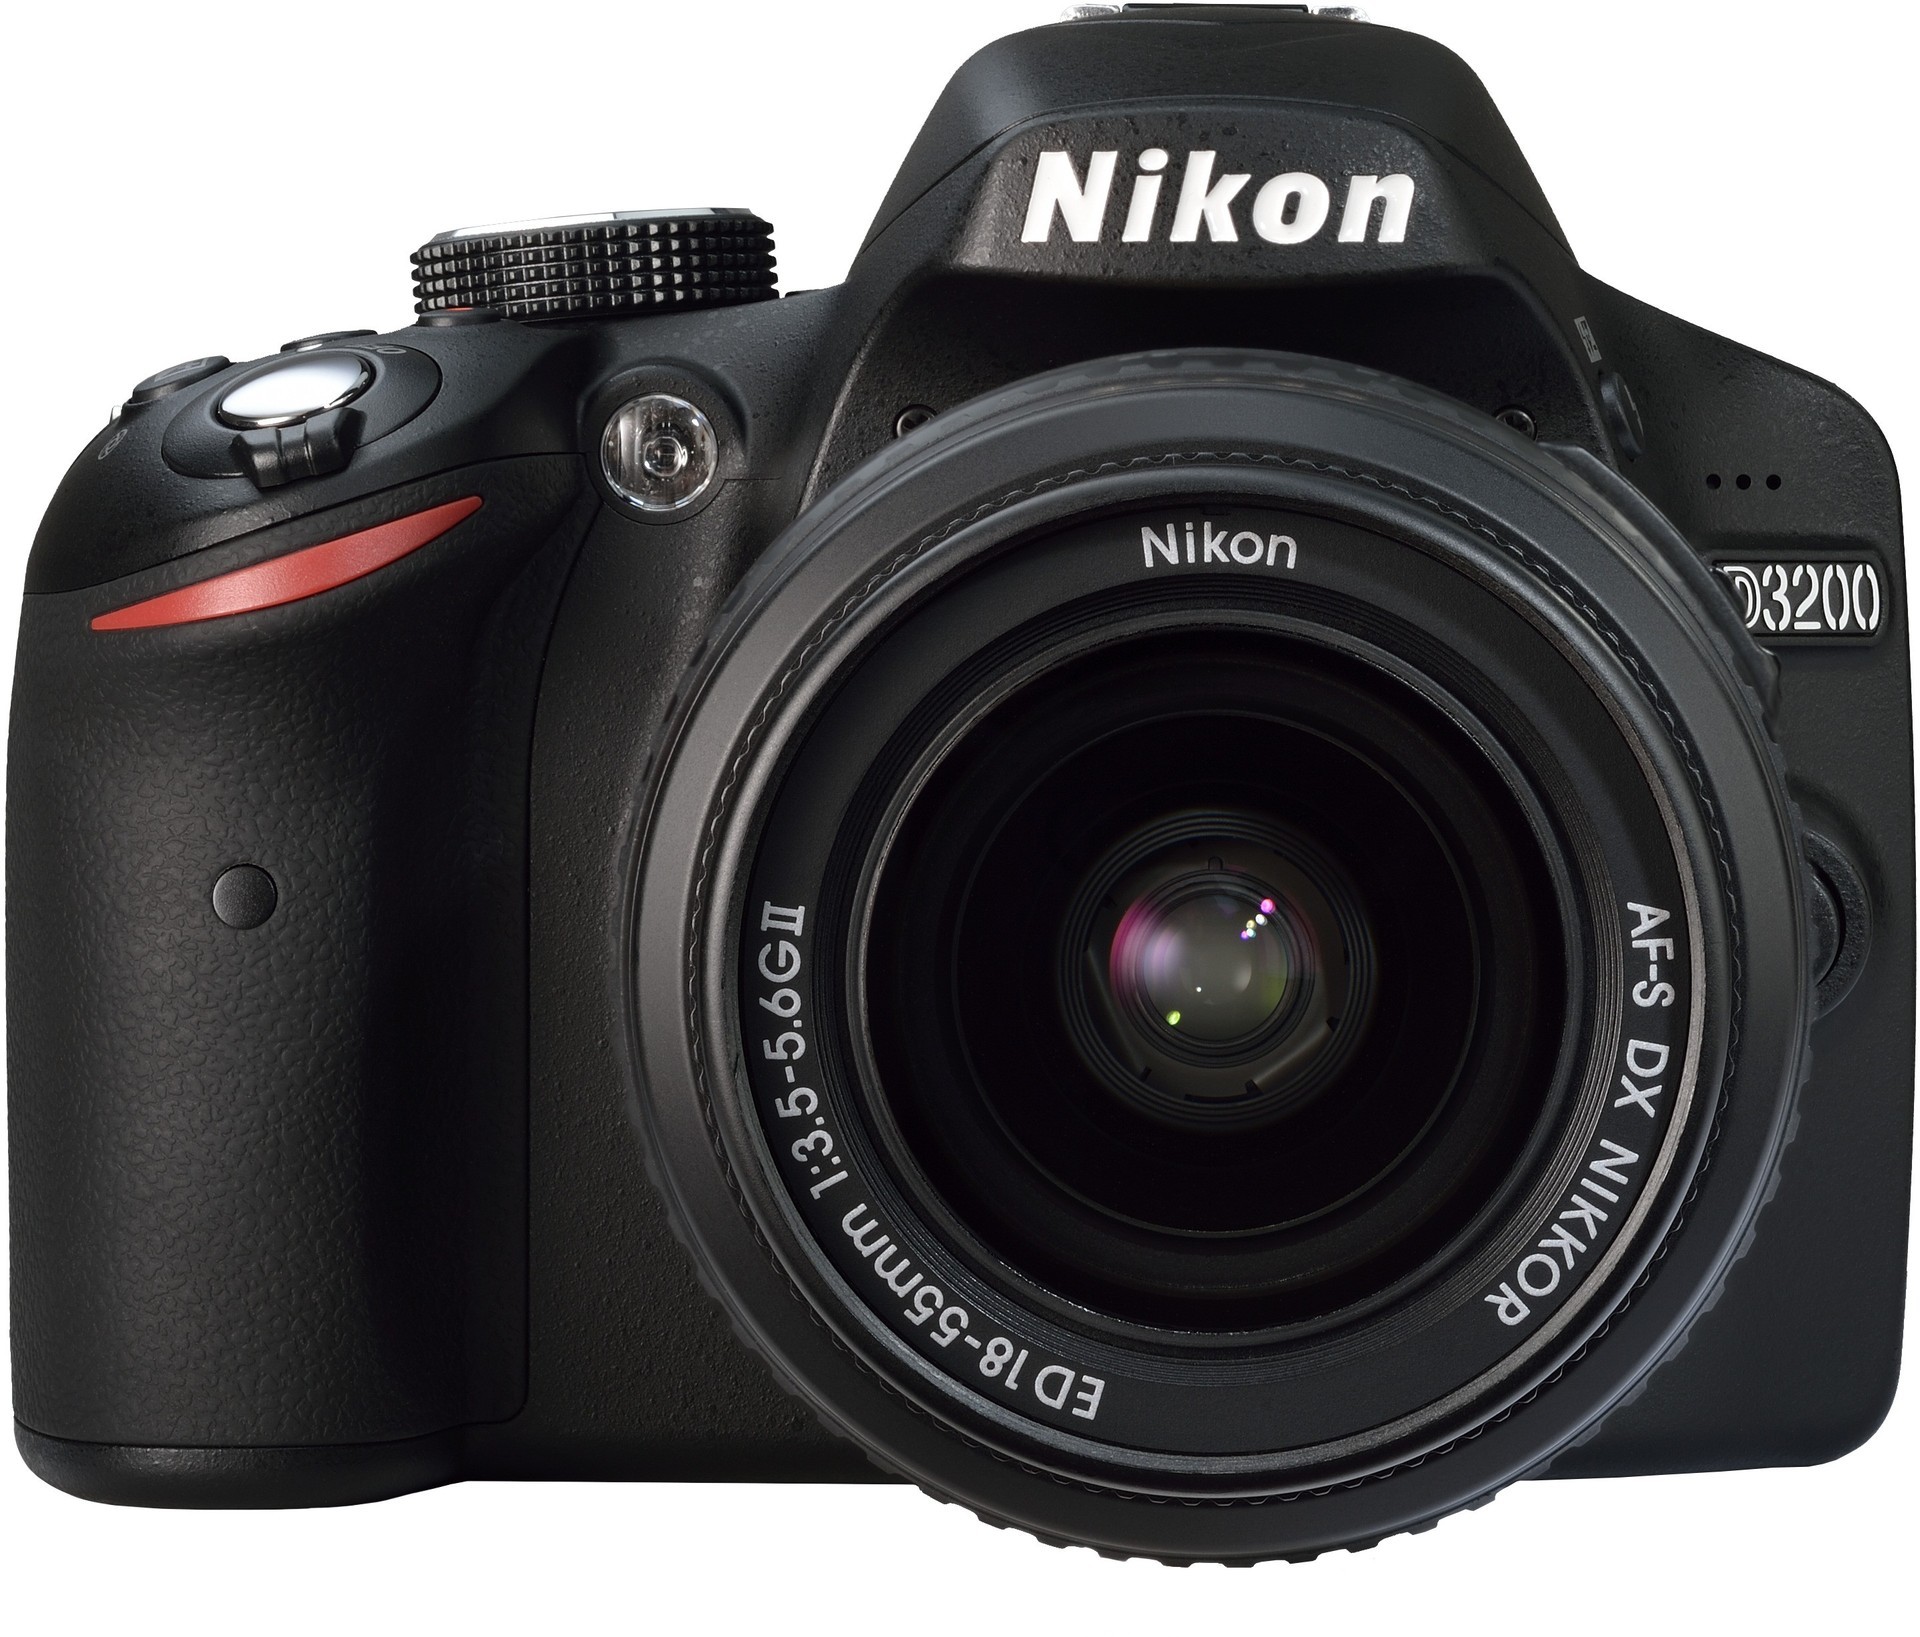 Nikon D5200 Reviews, Specifications, Daily Prices & Comparison